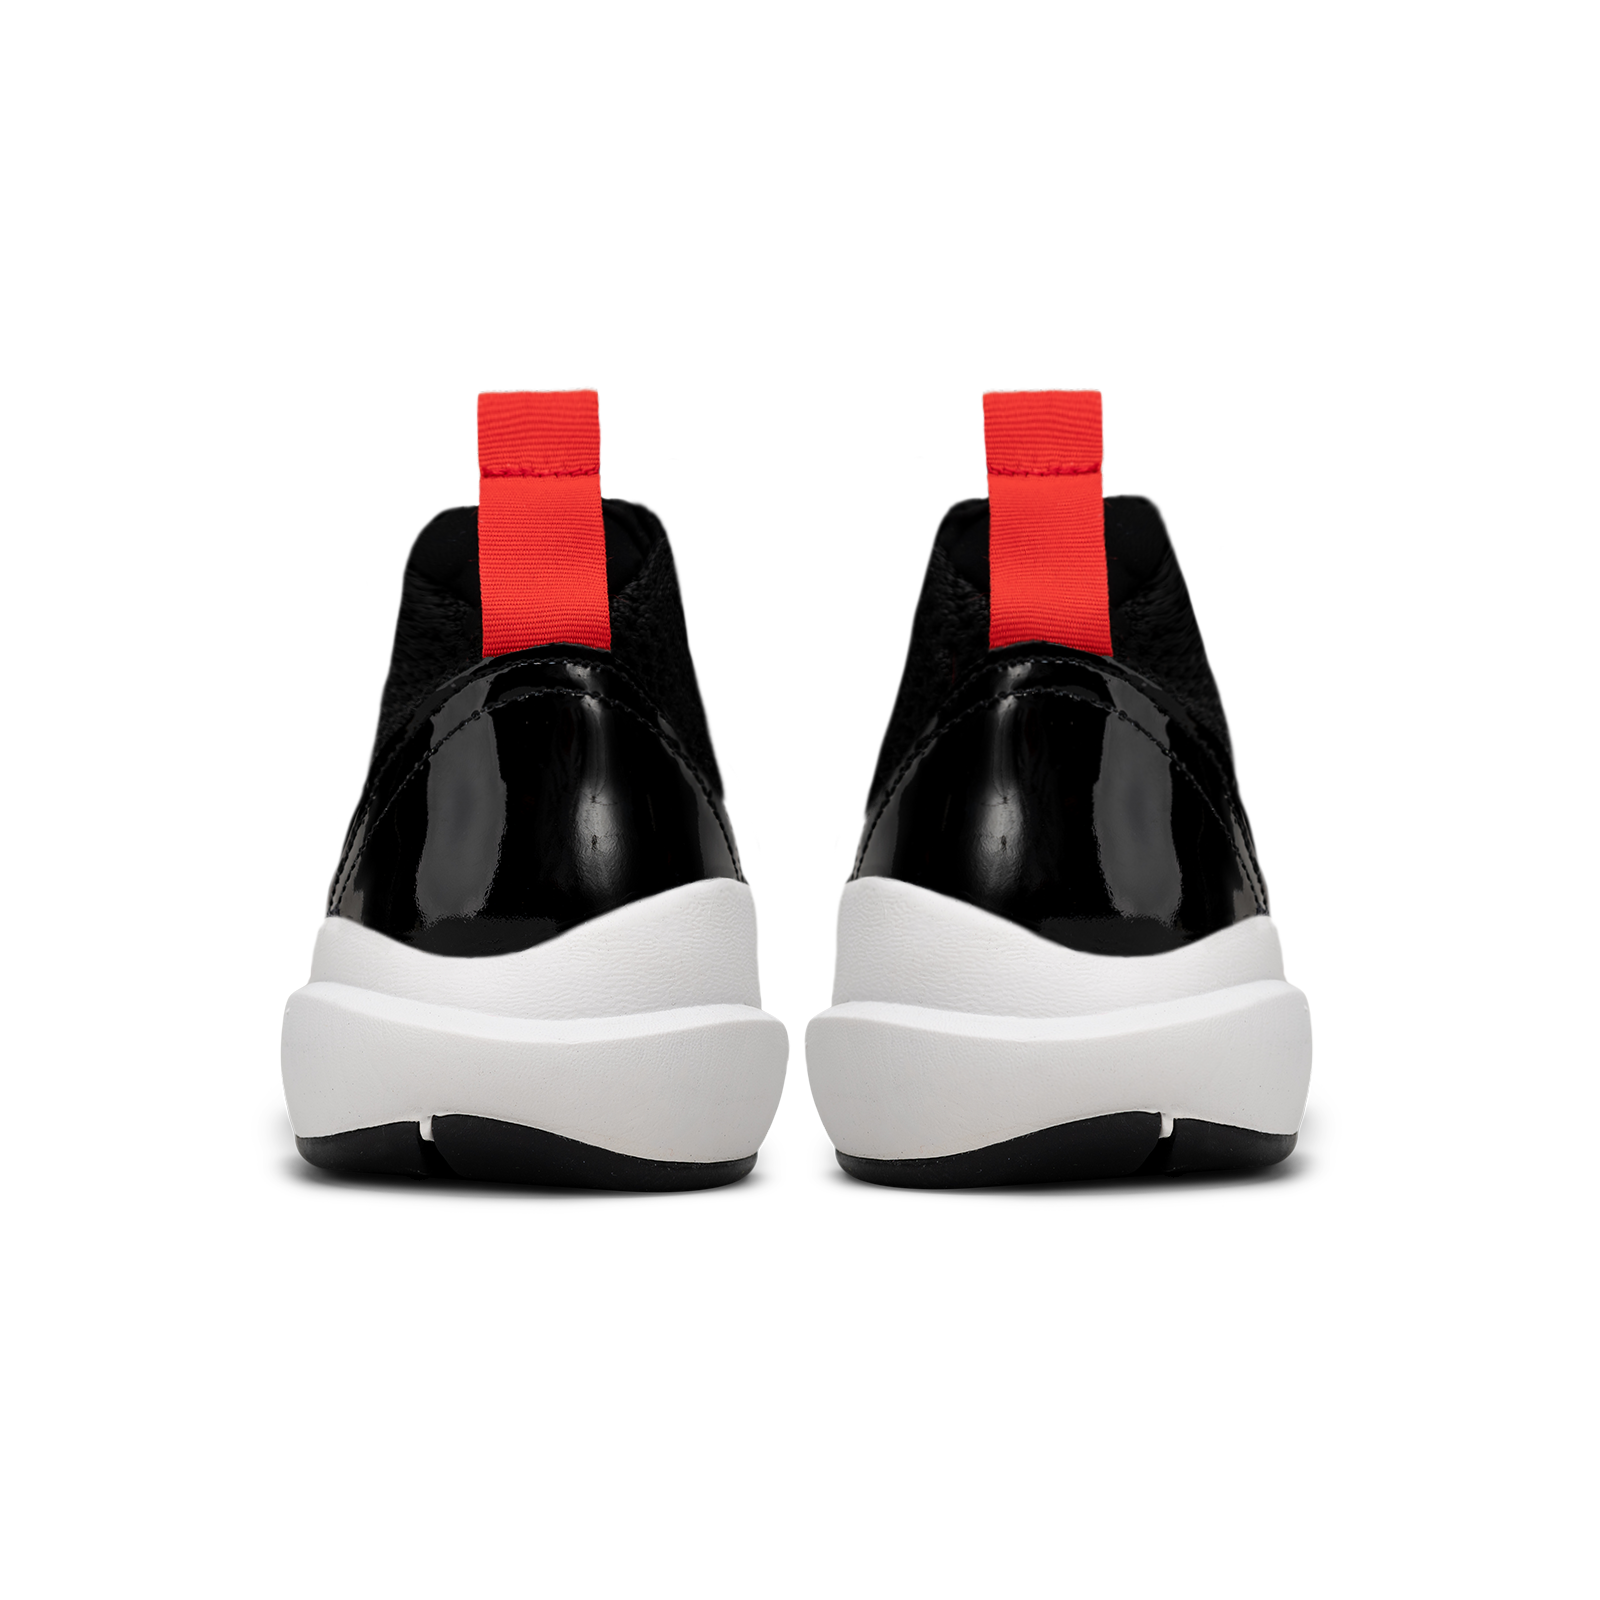 Backview, Cloudstryk Advantage is a runner with Black patent leather and suede overlays zoom mesh underlays, red heel pull molded lace holder, white eva midsol and a translucent black rubber outsole.